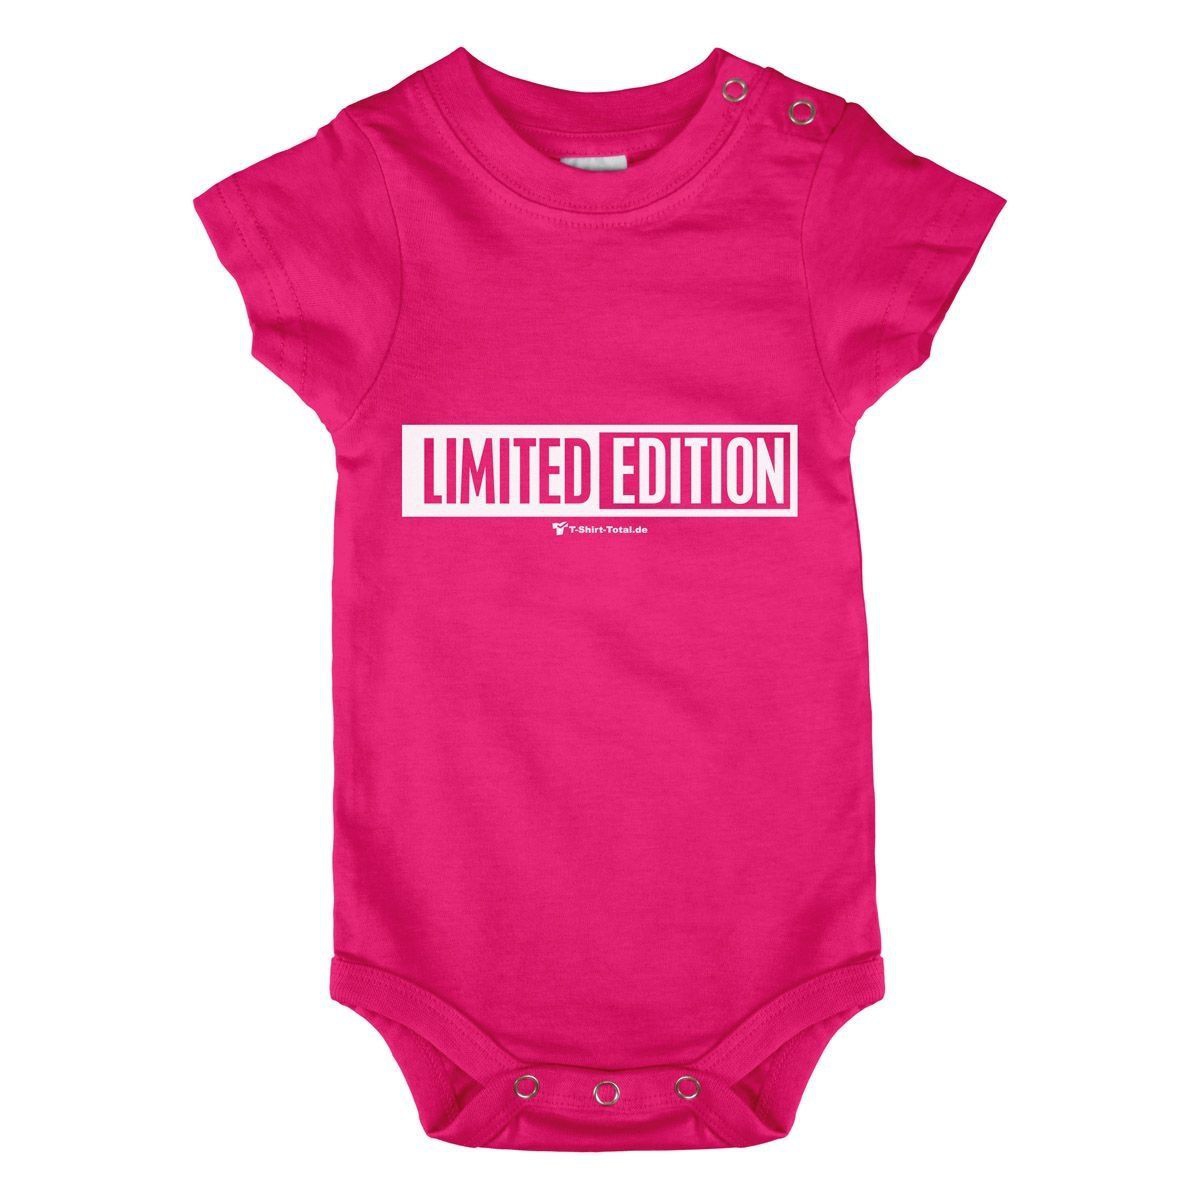 Limited Edition Baby Body Kurzarm pink 68 / 74